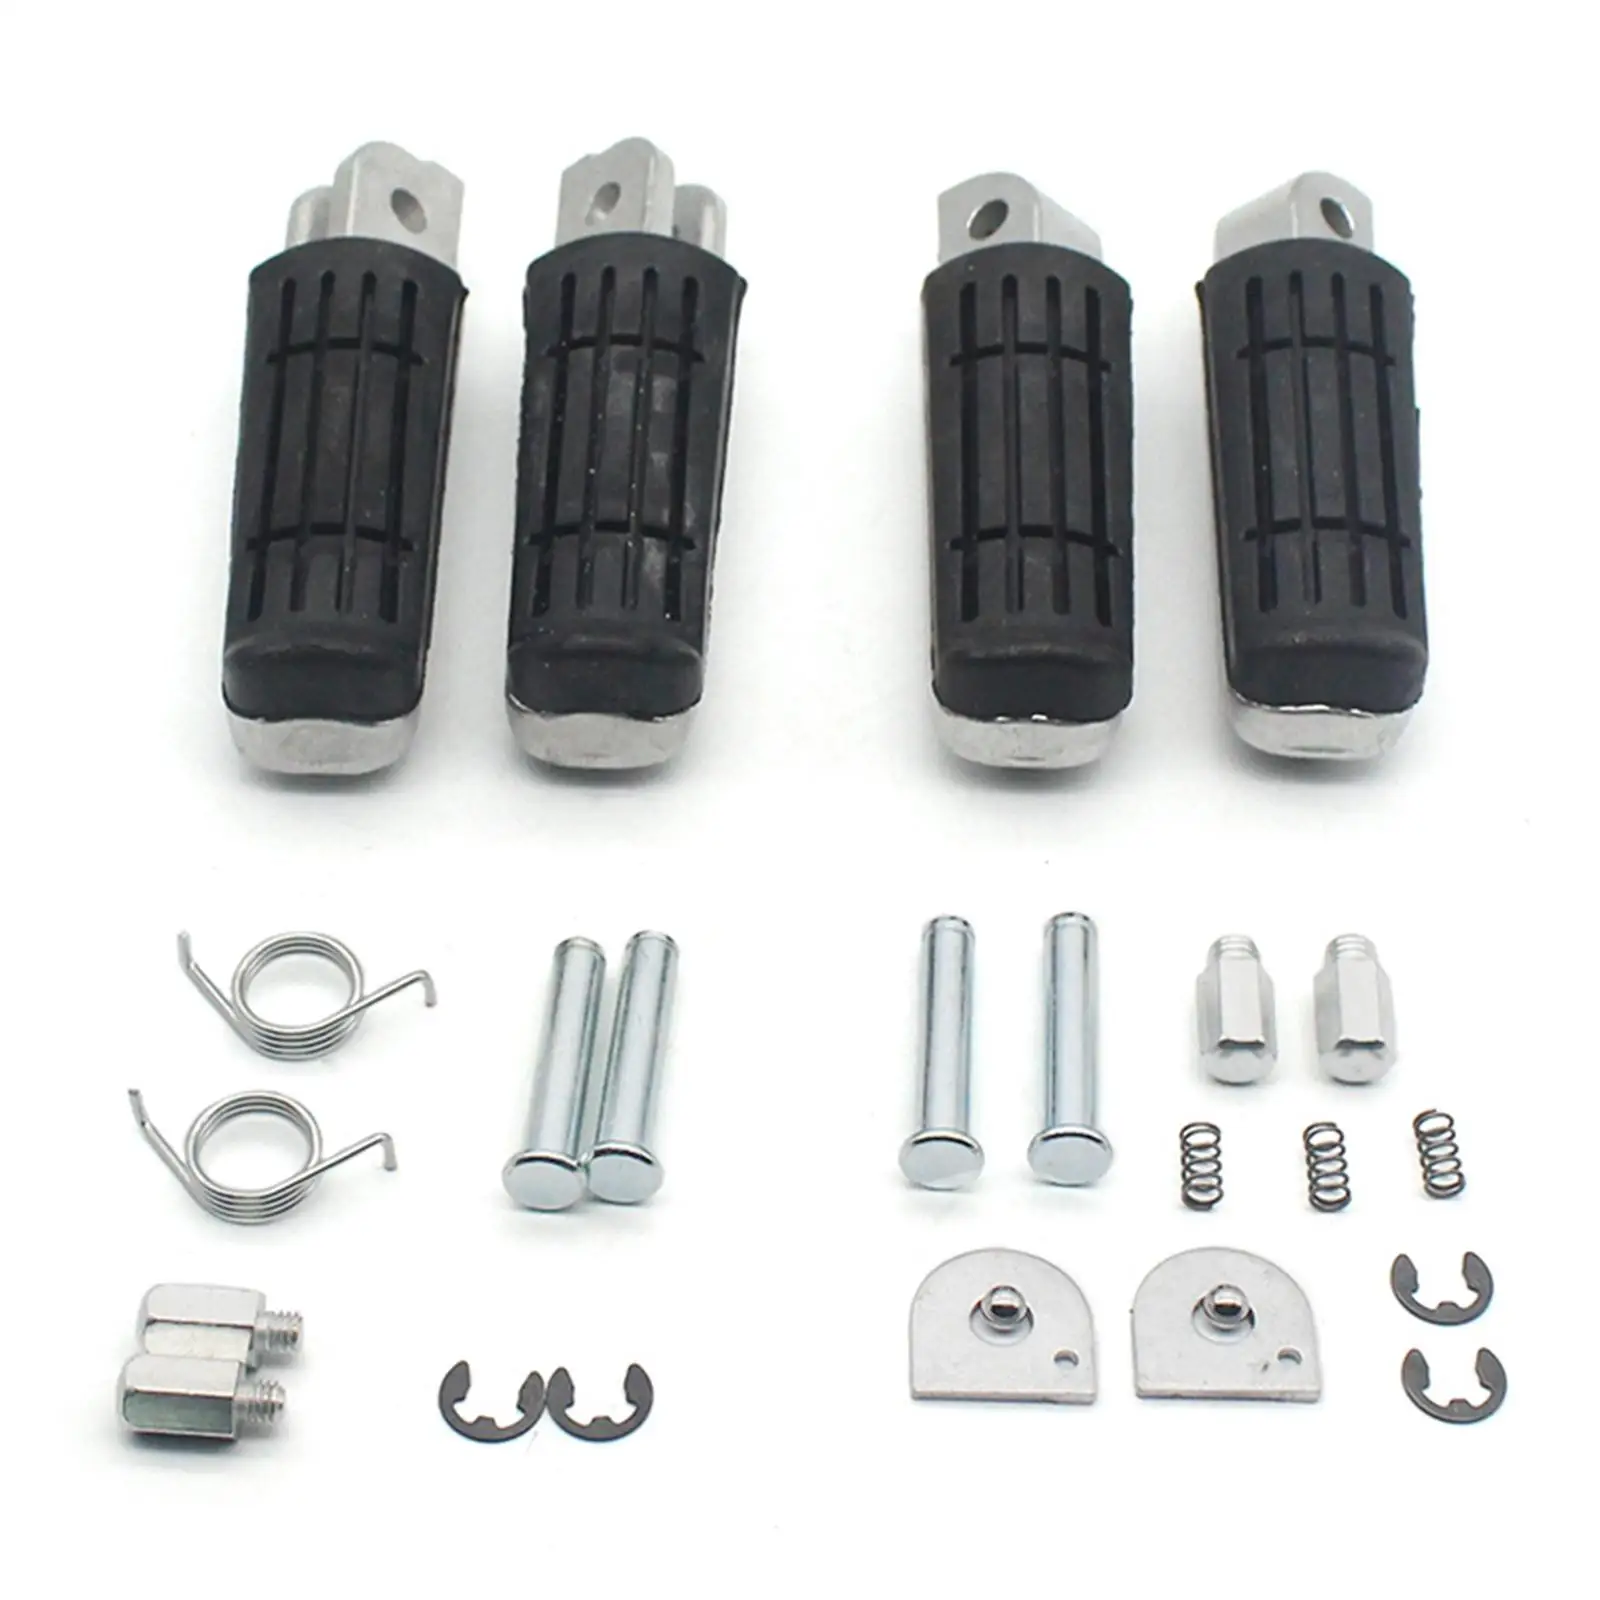 1Pair Motorcycle Foot Pegs Footrests Pedals for R1 FZ6R FZ6 FJR1300 - $20.78